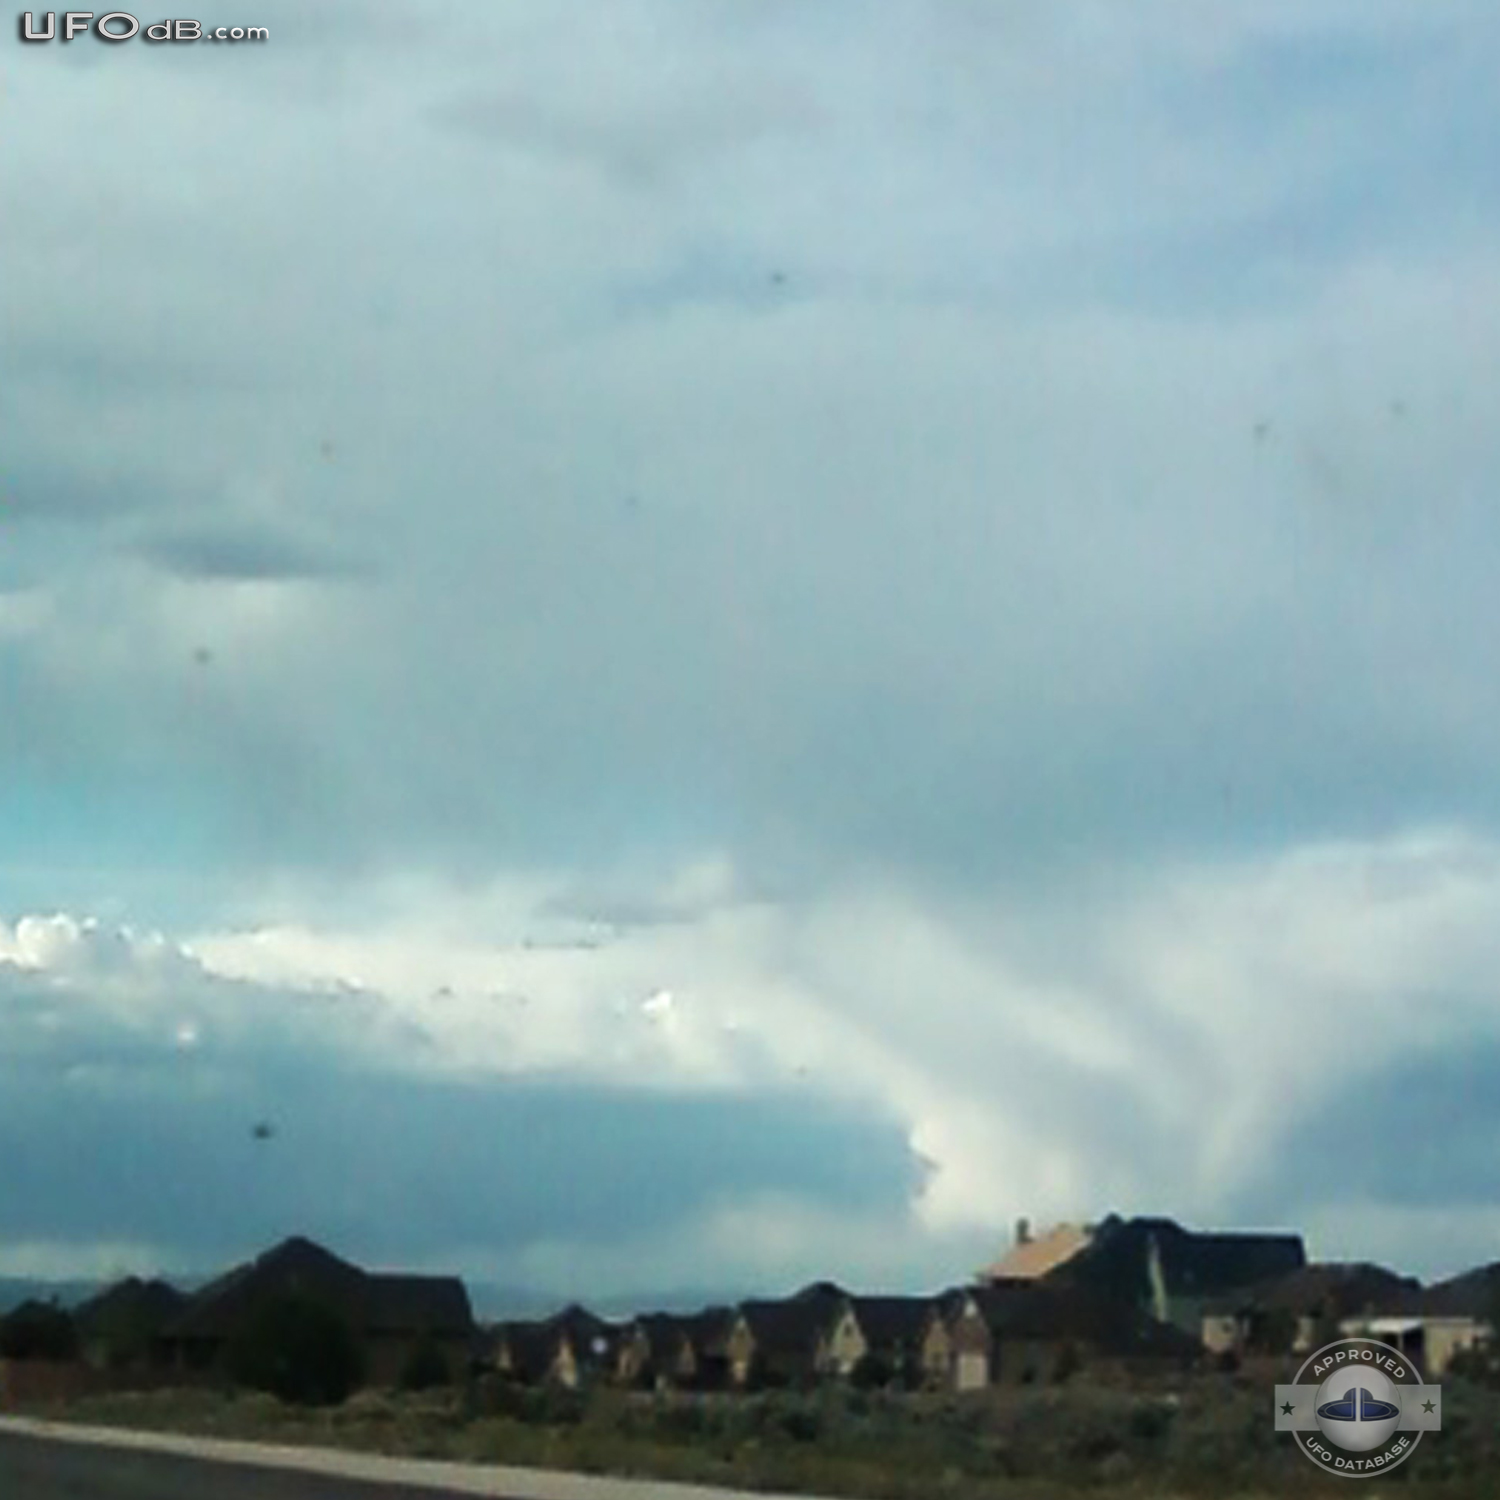 Group of UFOs hiding in the clouds in Cedar City, Utah | May 14 2011 UFO Picture #303-2